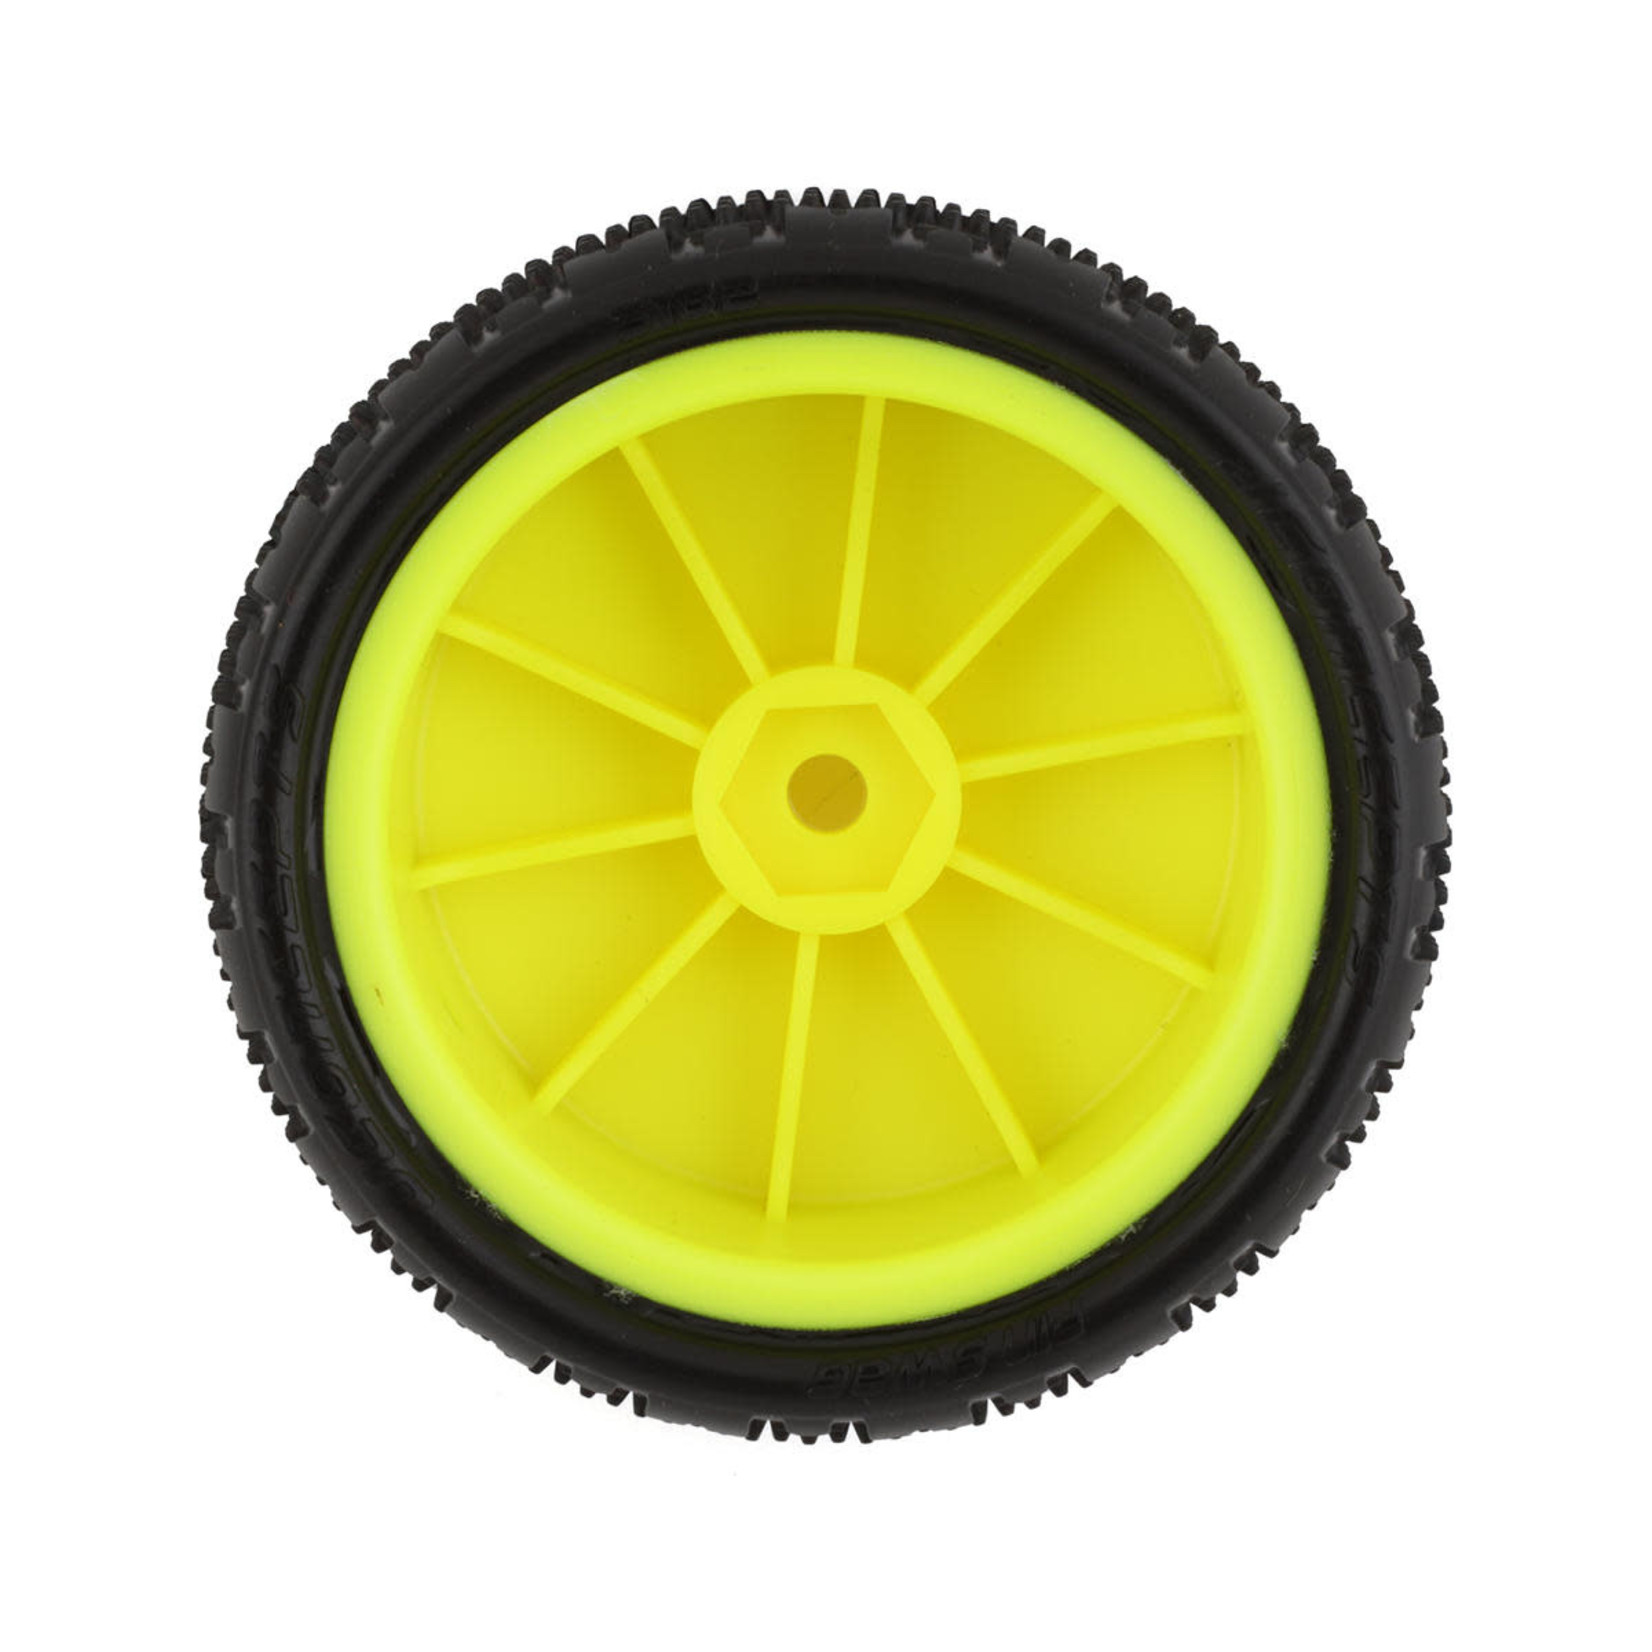 JConcepts JConcepts Pin Swag 2.2" Pre-Mounted 4WD Front Buggy Tire (Yellow) (2) (Pink) w/12mm Hex #3182-201011